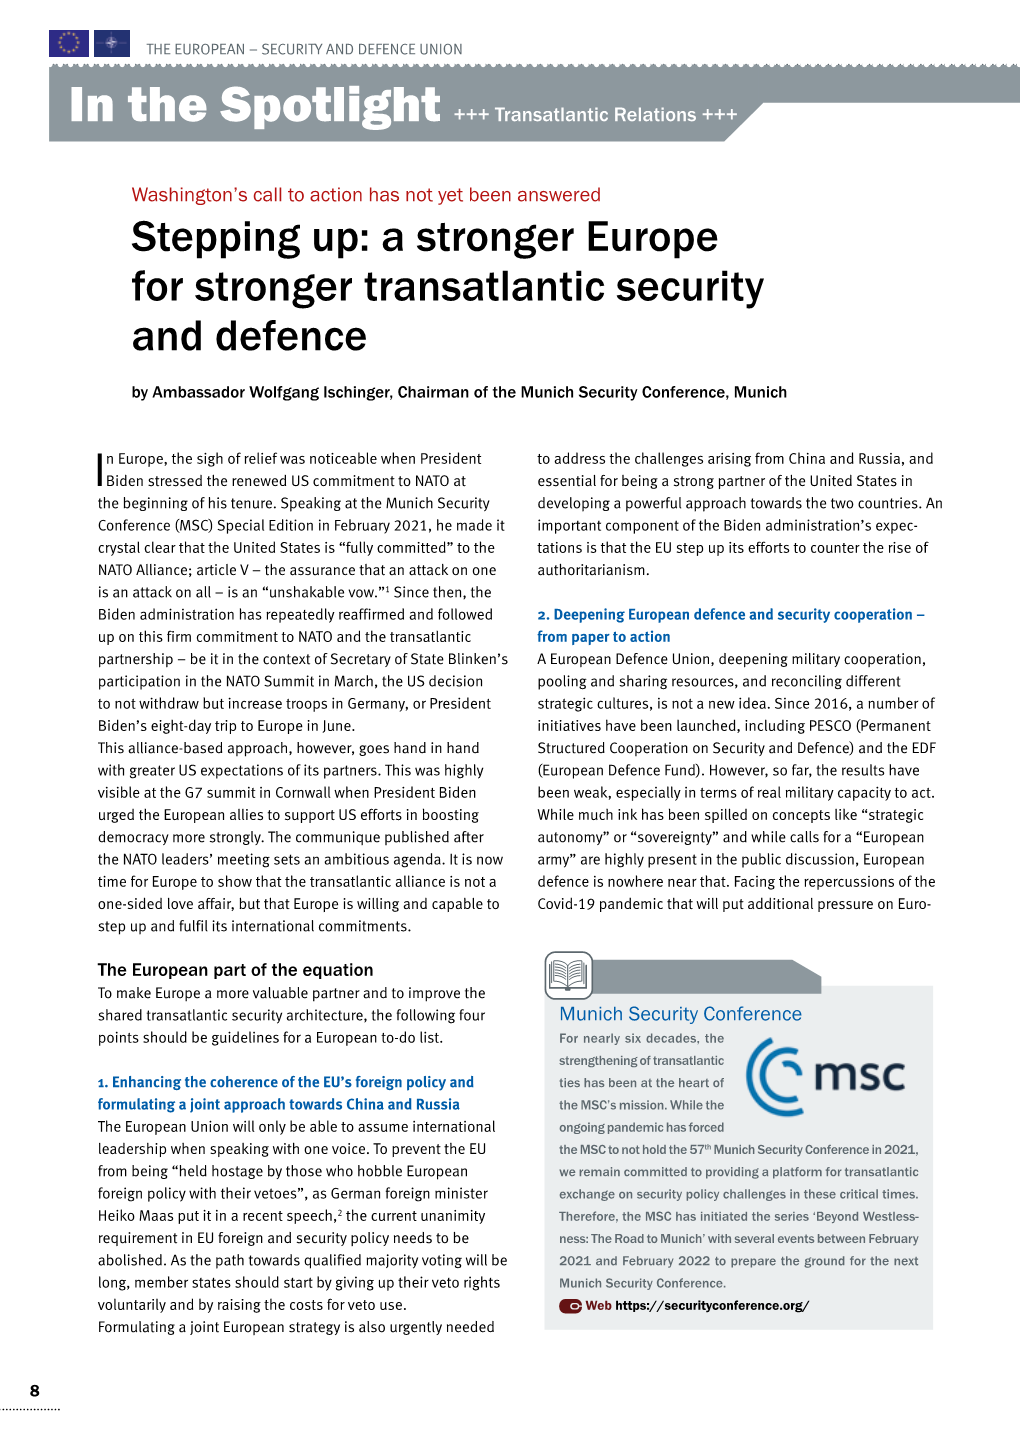 A Stronger Europe for Stronger Transatlantic Security and Defence